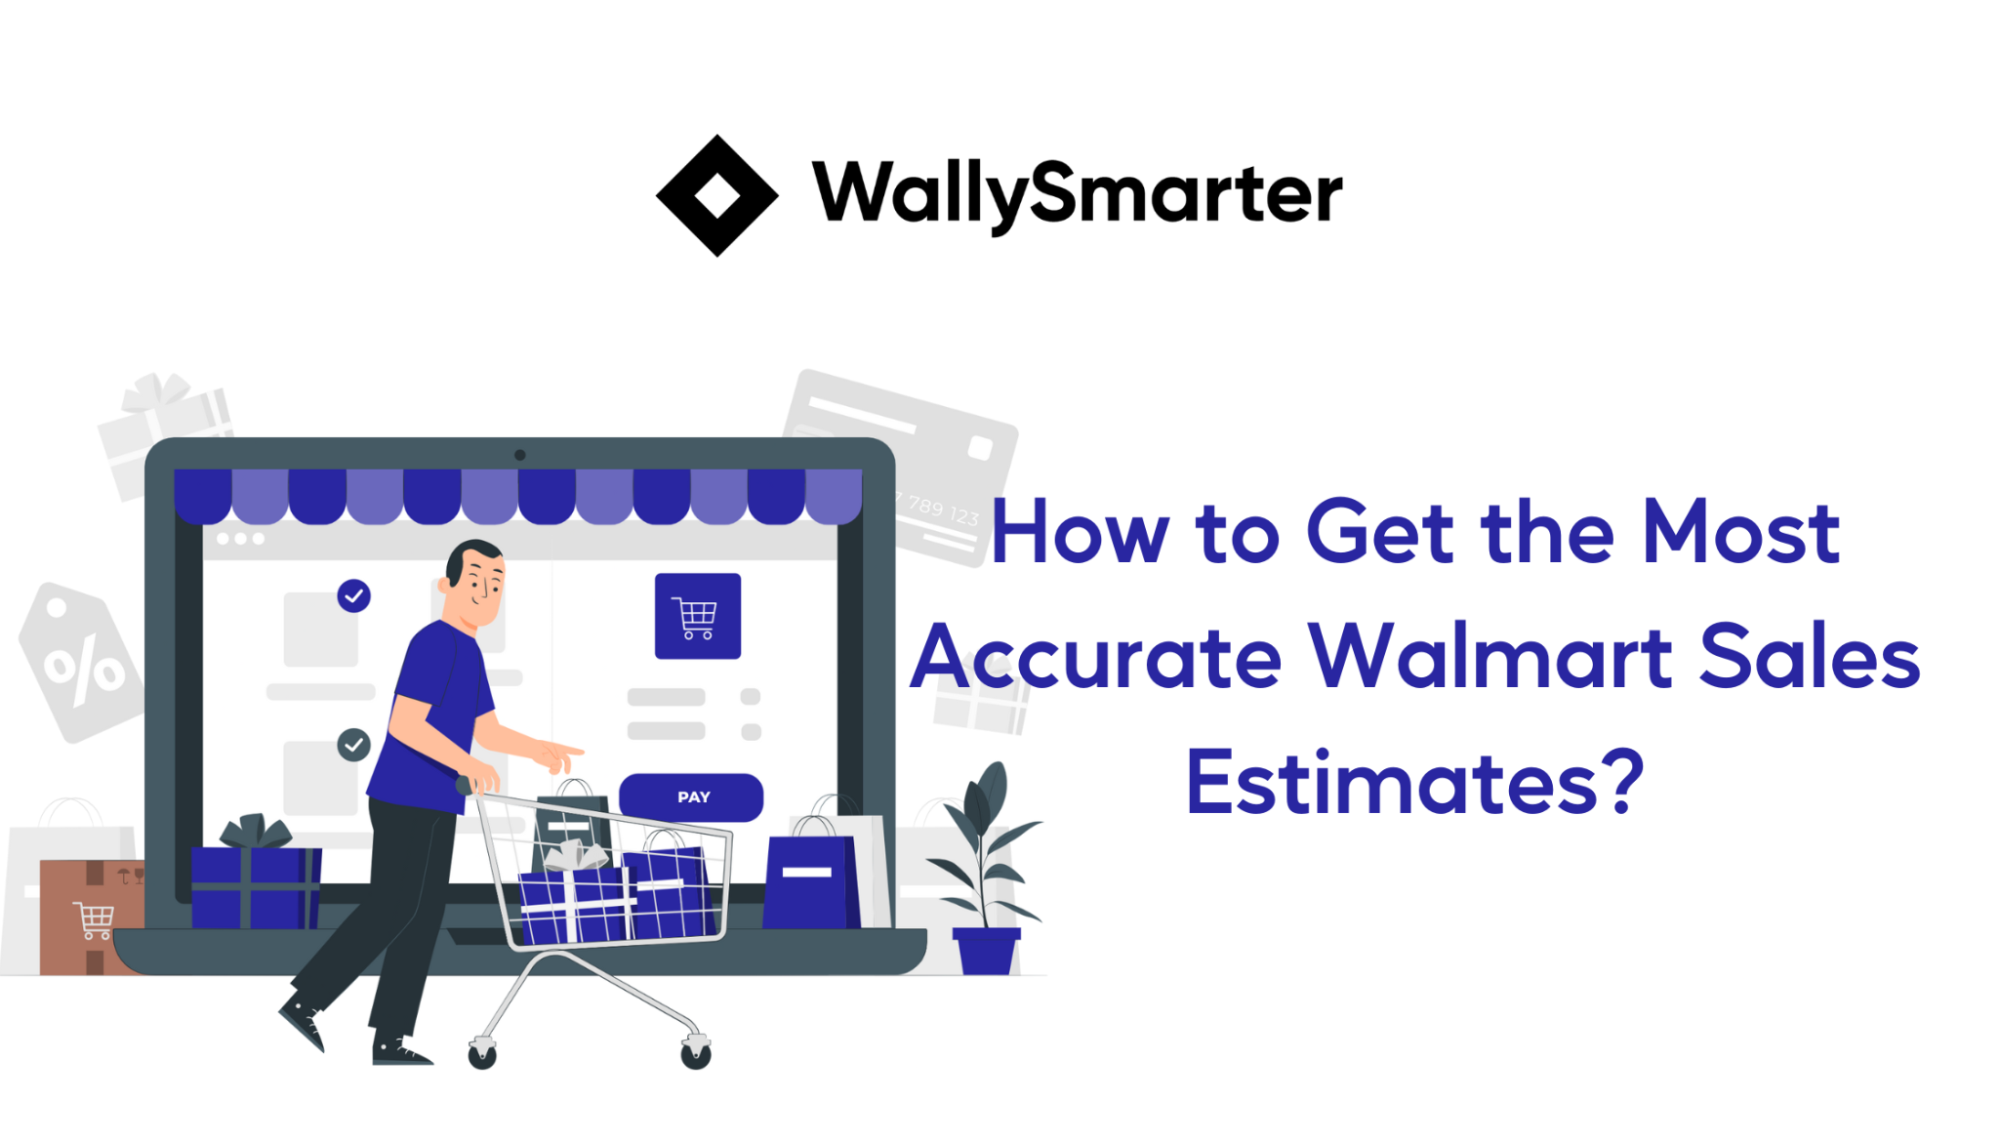 How to Get the Most Accurate Walmart Sales Estimates